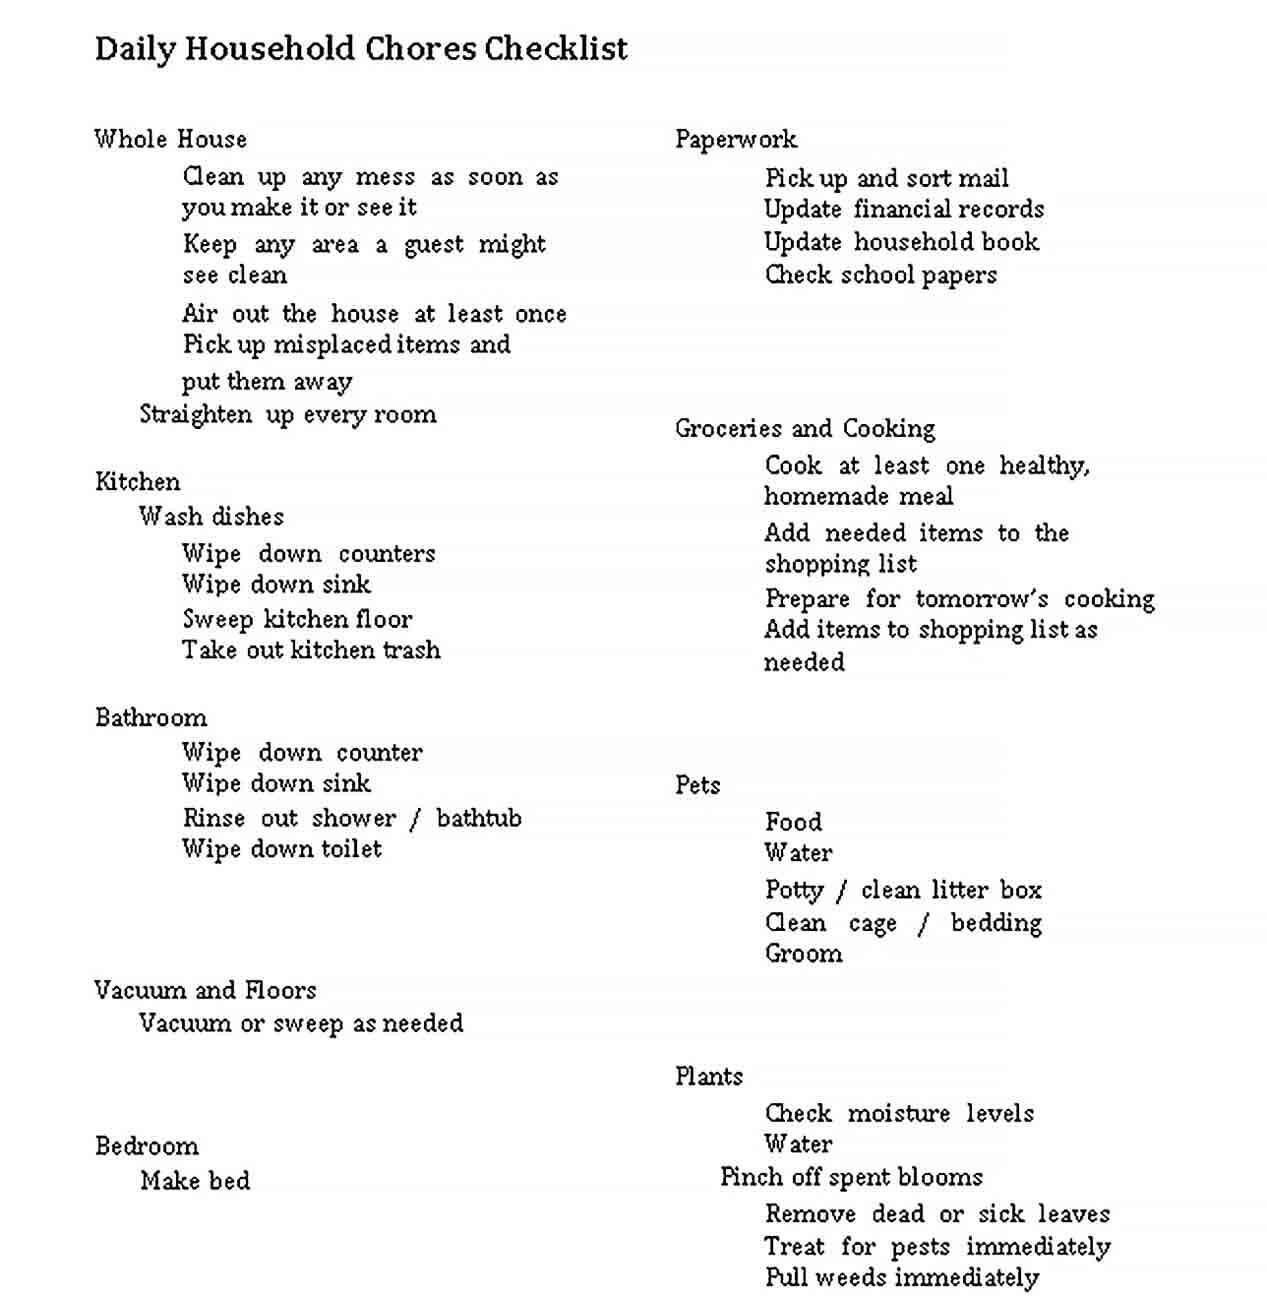 Sample Daily Household Chores Checklist